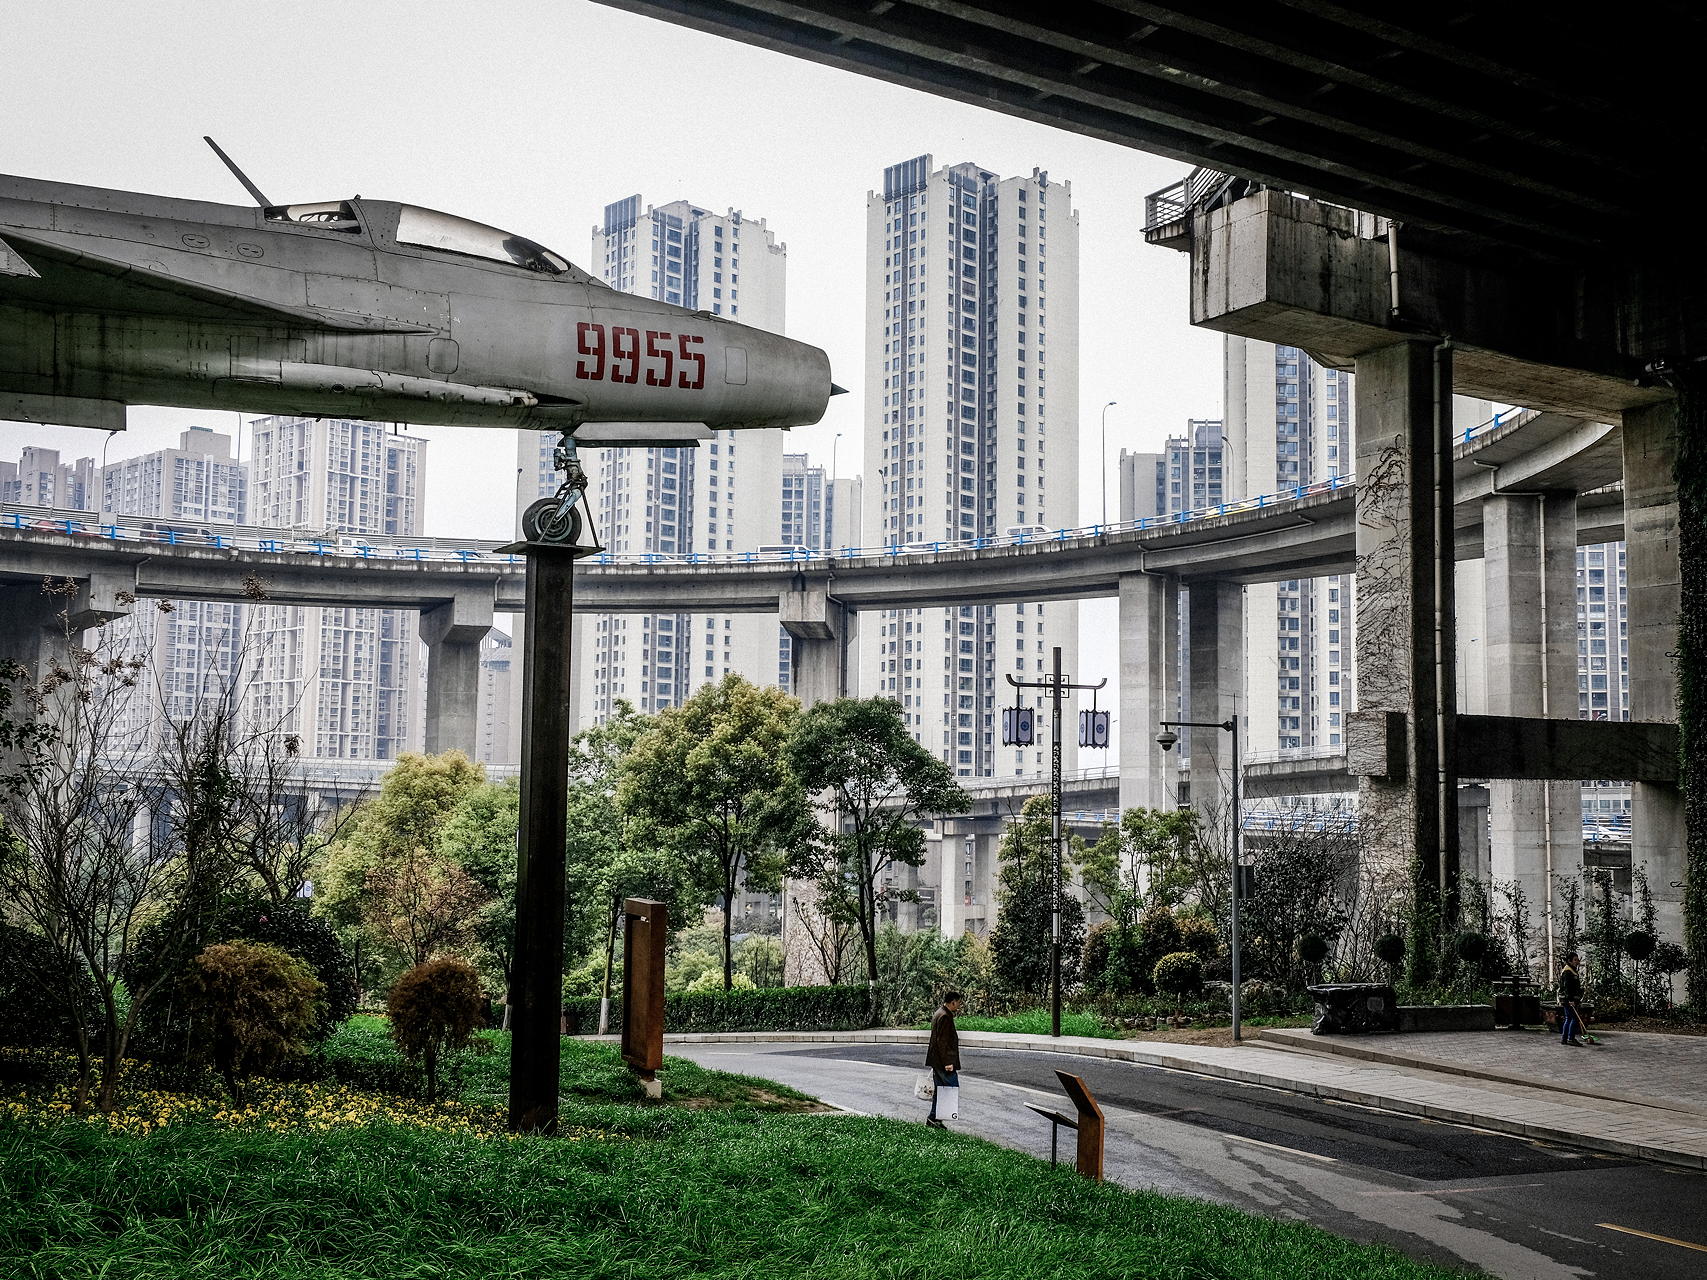 Fabian Muir - Megalopolis, or the Subversion of China's Landscapes - Felix Schoeller Photoaward